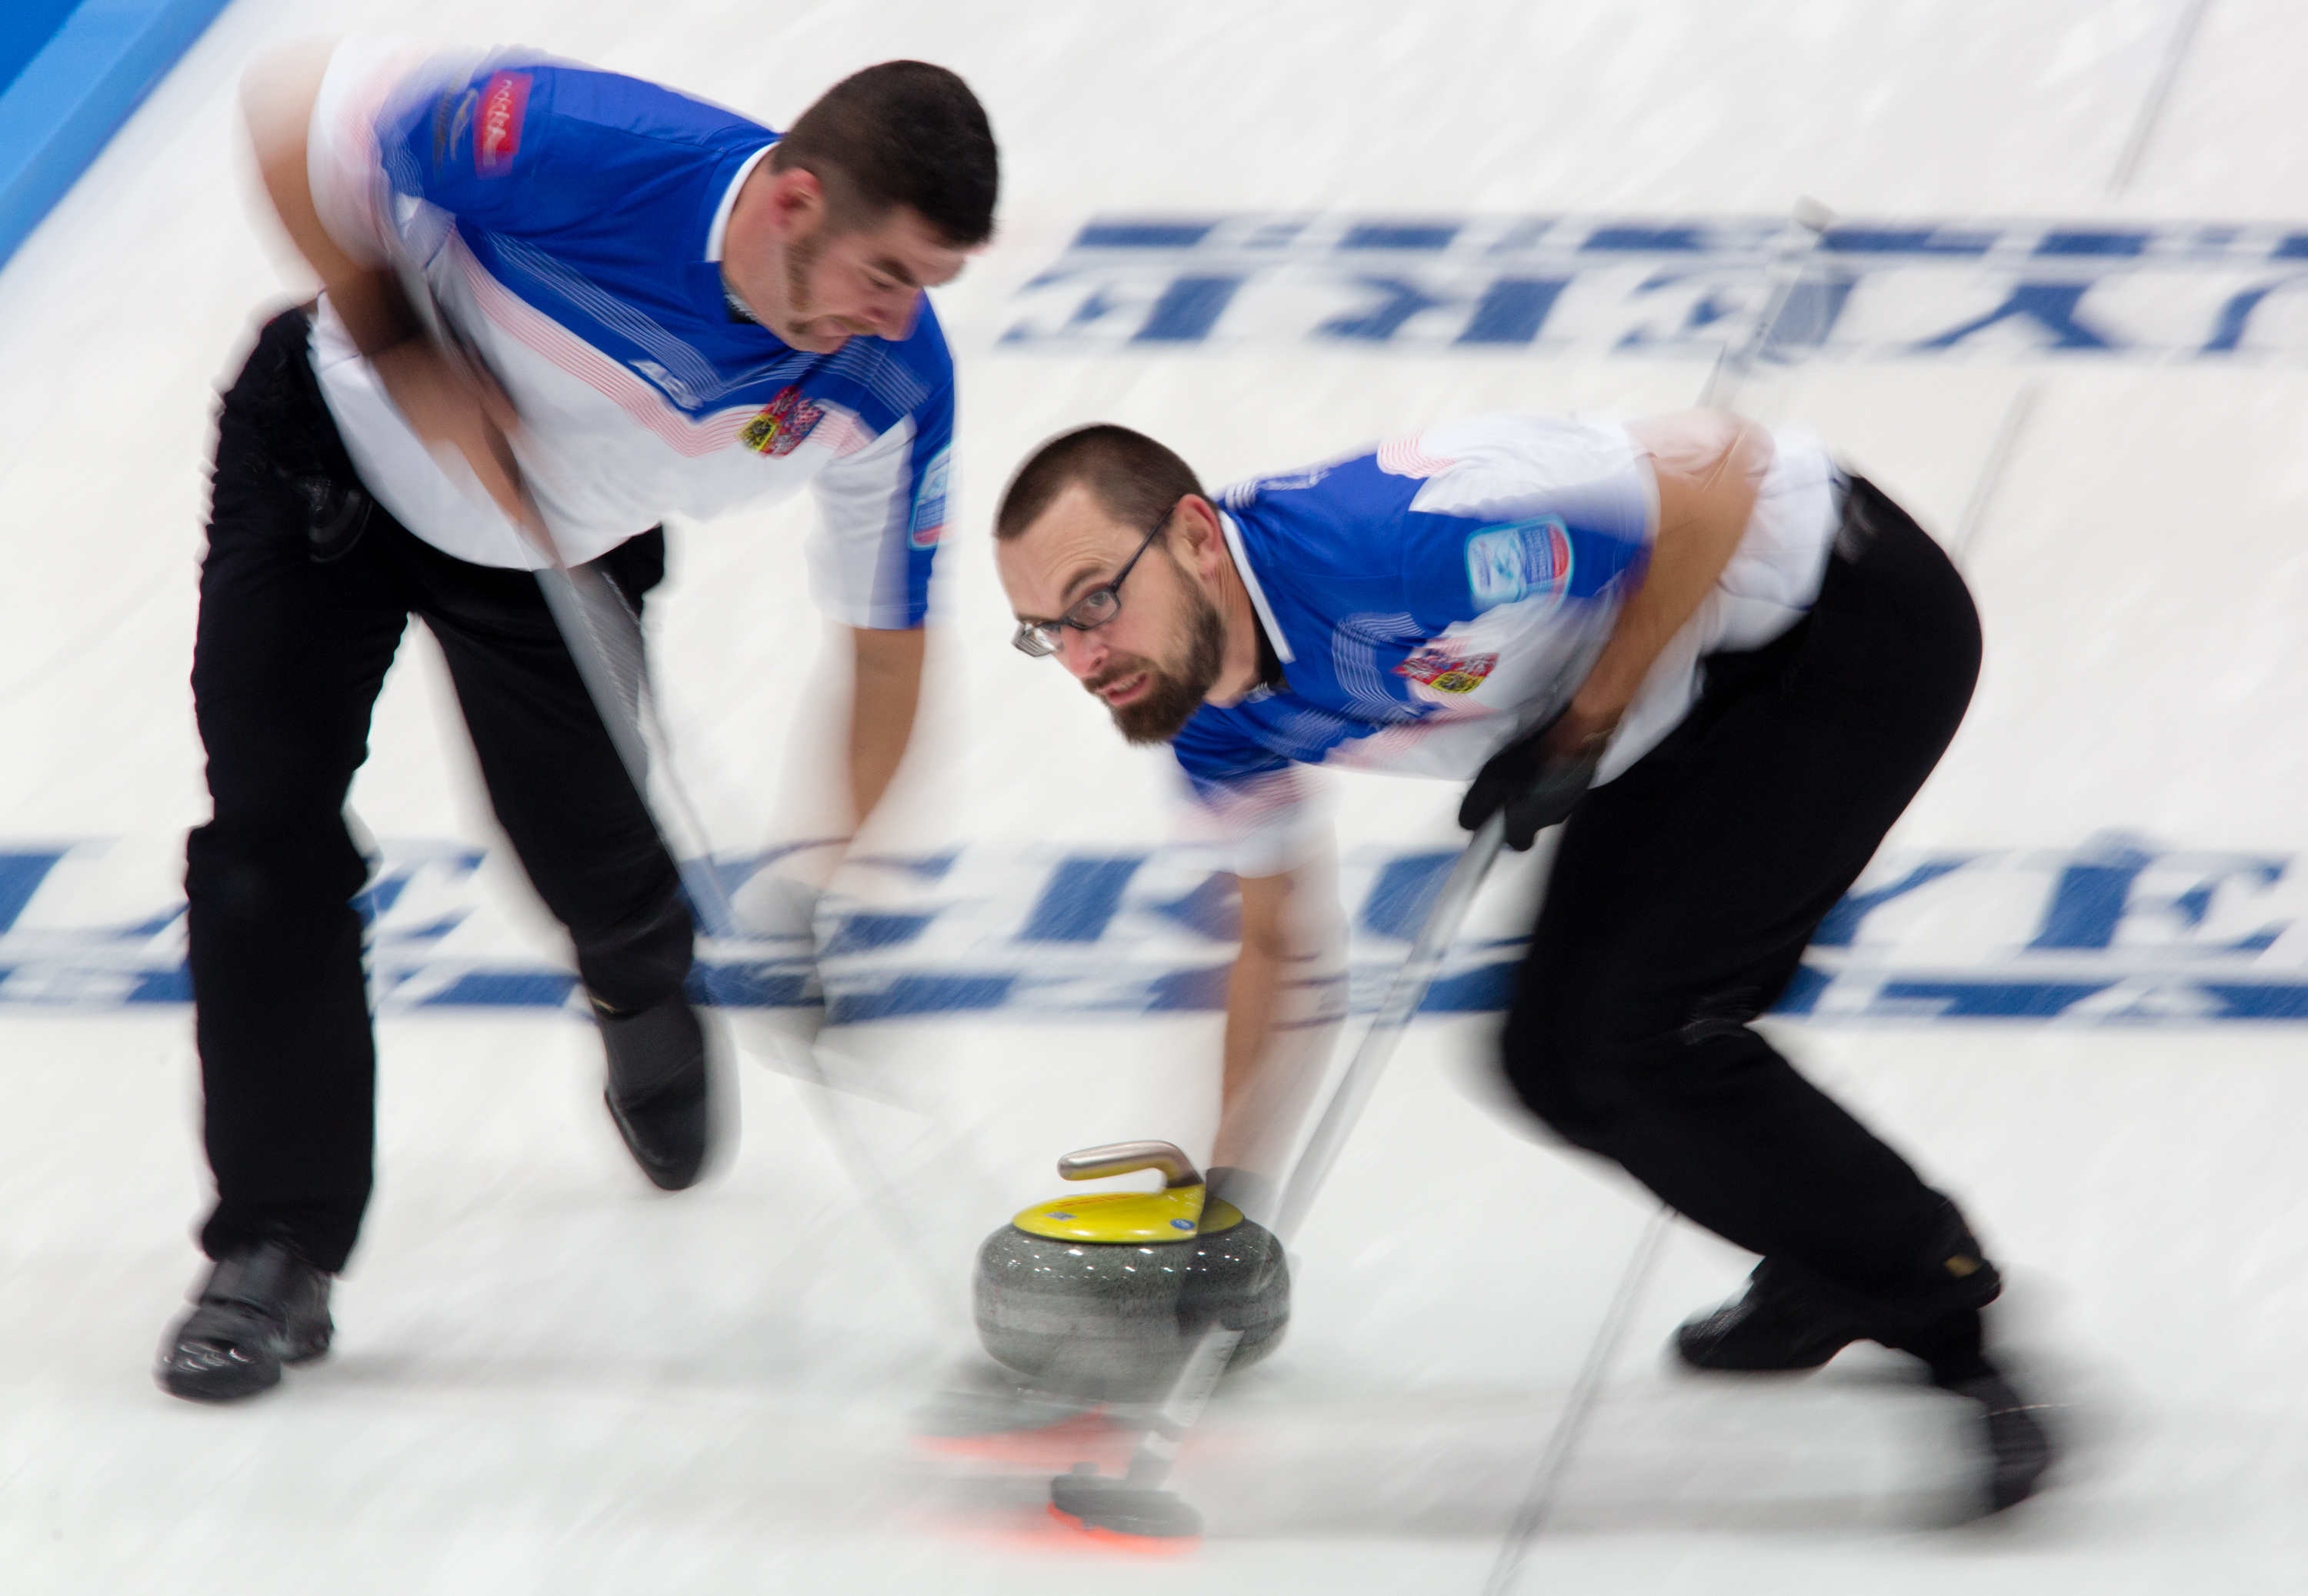 Martin Snitil and Jindrich Kitzberger sweep a stone down the ice at the  Le Gruyre European Curling Championships on 11/22/2014. The Czech Republic ended up in 5th place after losing a tie break game to Norway.